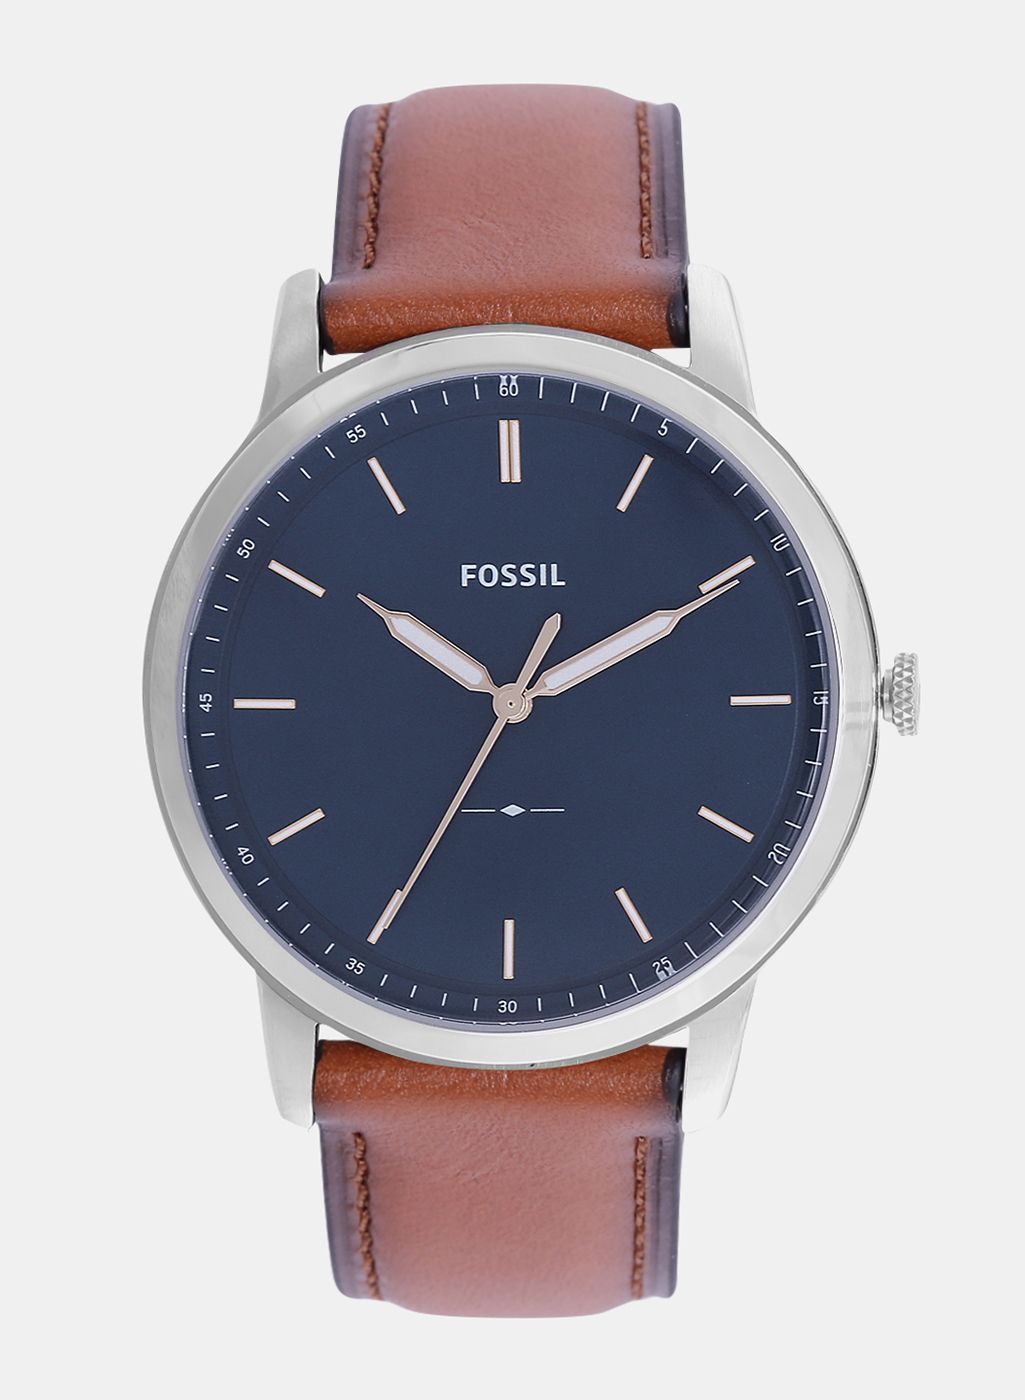 Fossil Store - Shop Fossil Watches, Handbags, Jewellery Online - Jabong